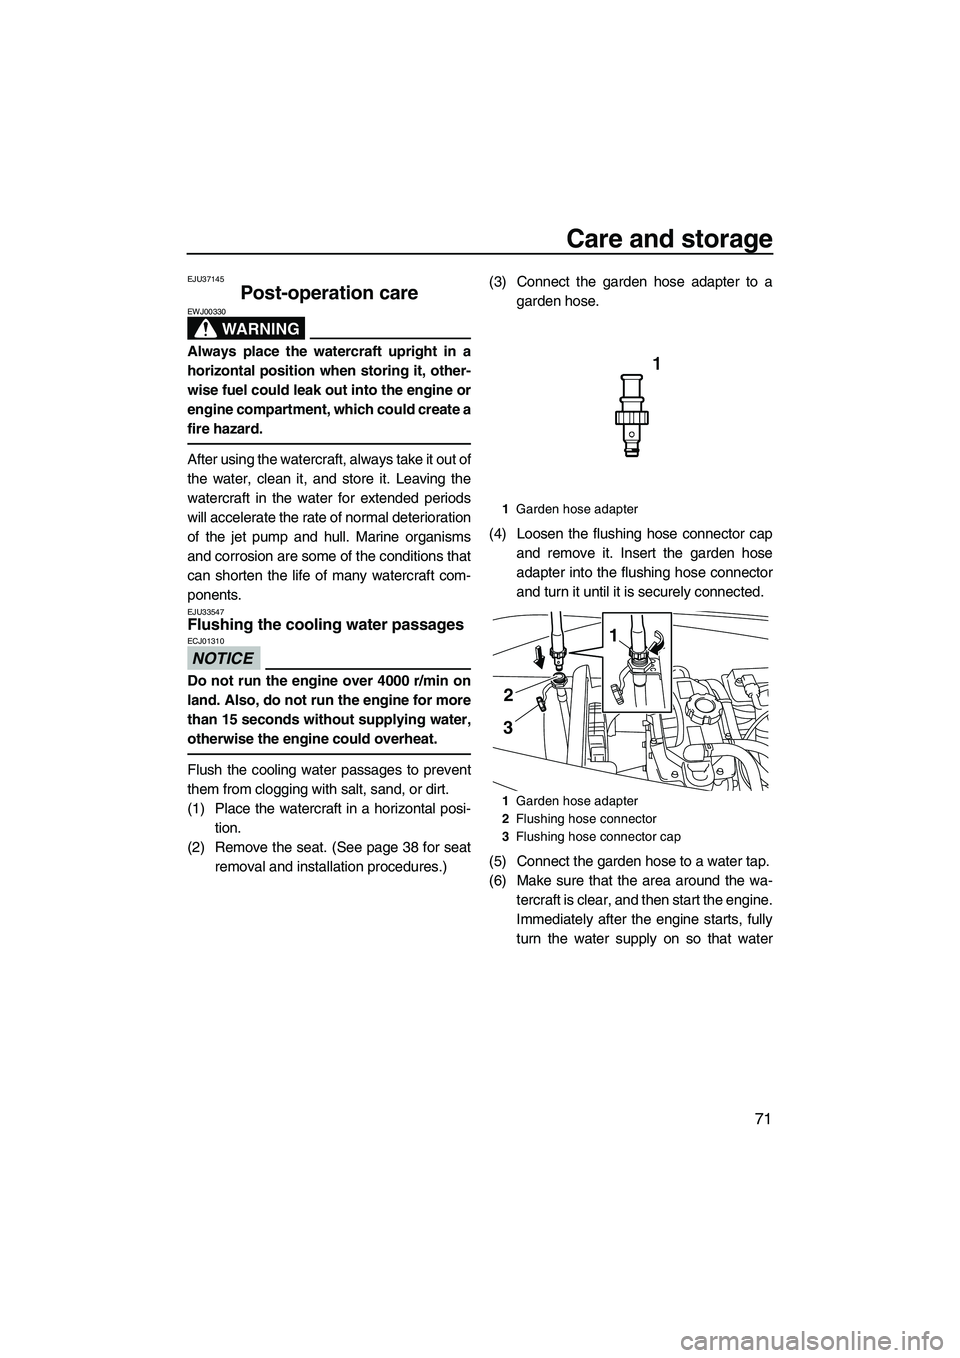 YAMAHA VX SPORT 2013  Owners Manual Care and storage
71
EJU37145
Post-operation care 
WARNING
EWJ00330
Always place the watercraft upright in a
horizontal position when storing it, other-
wise fuel could leak out into the engine or
engi